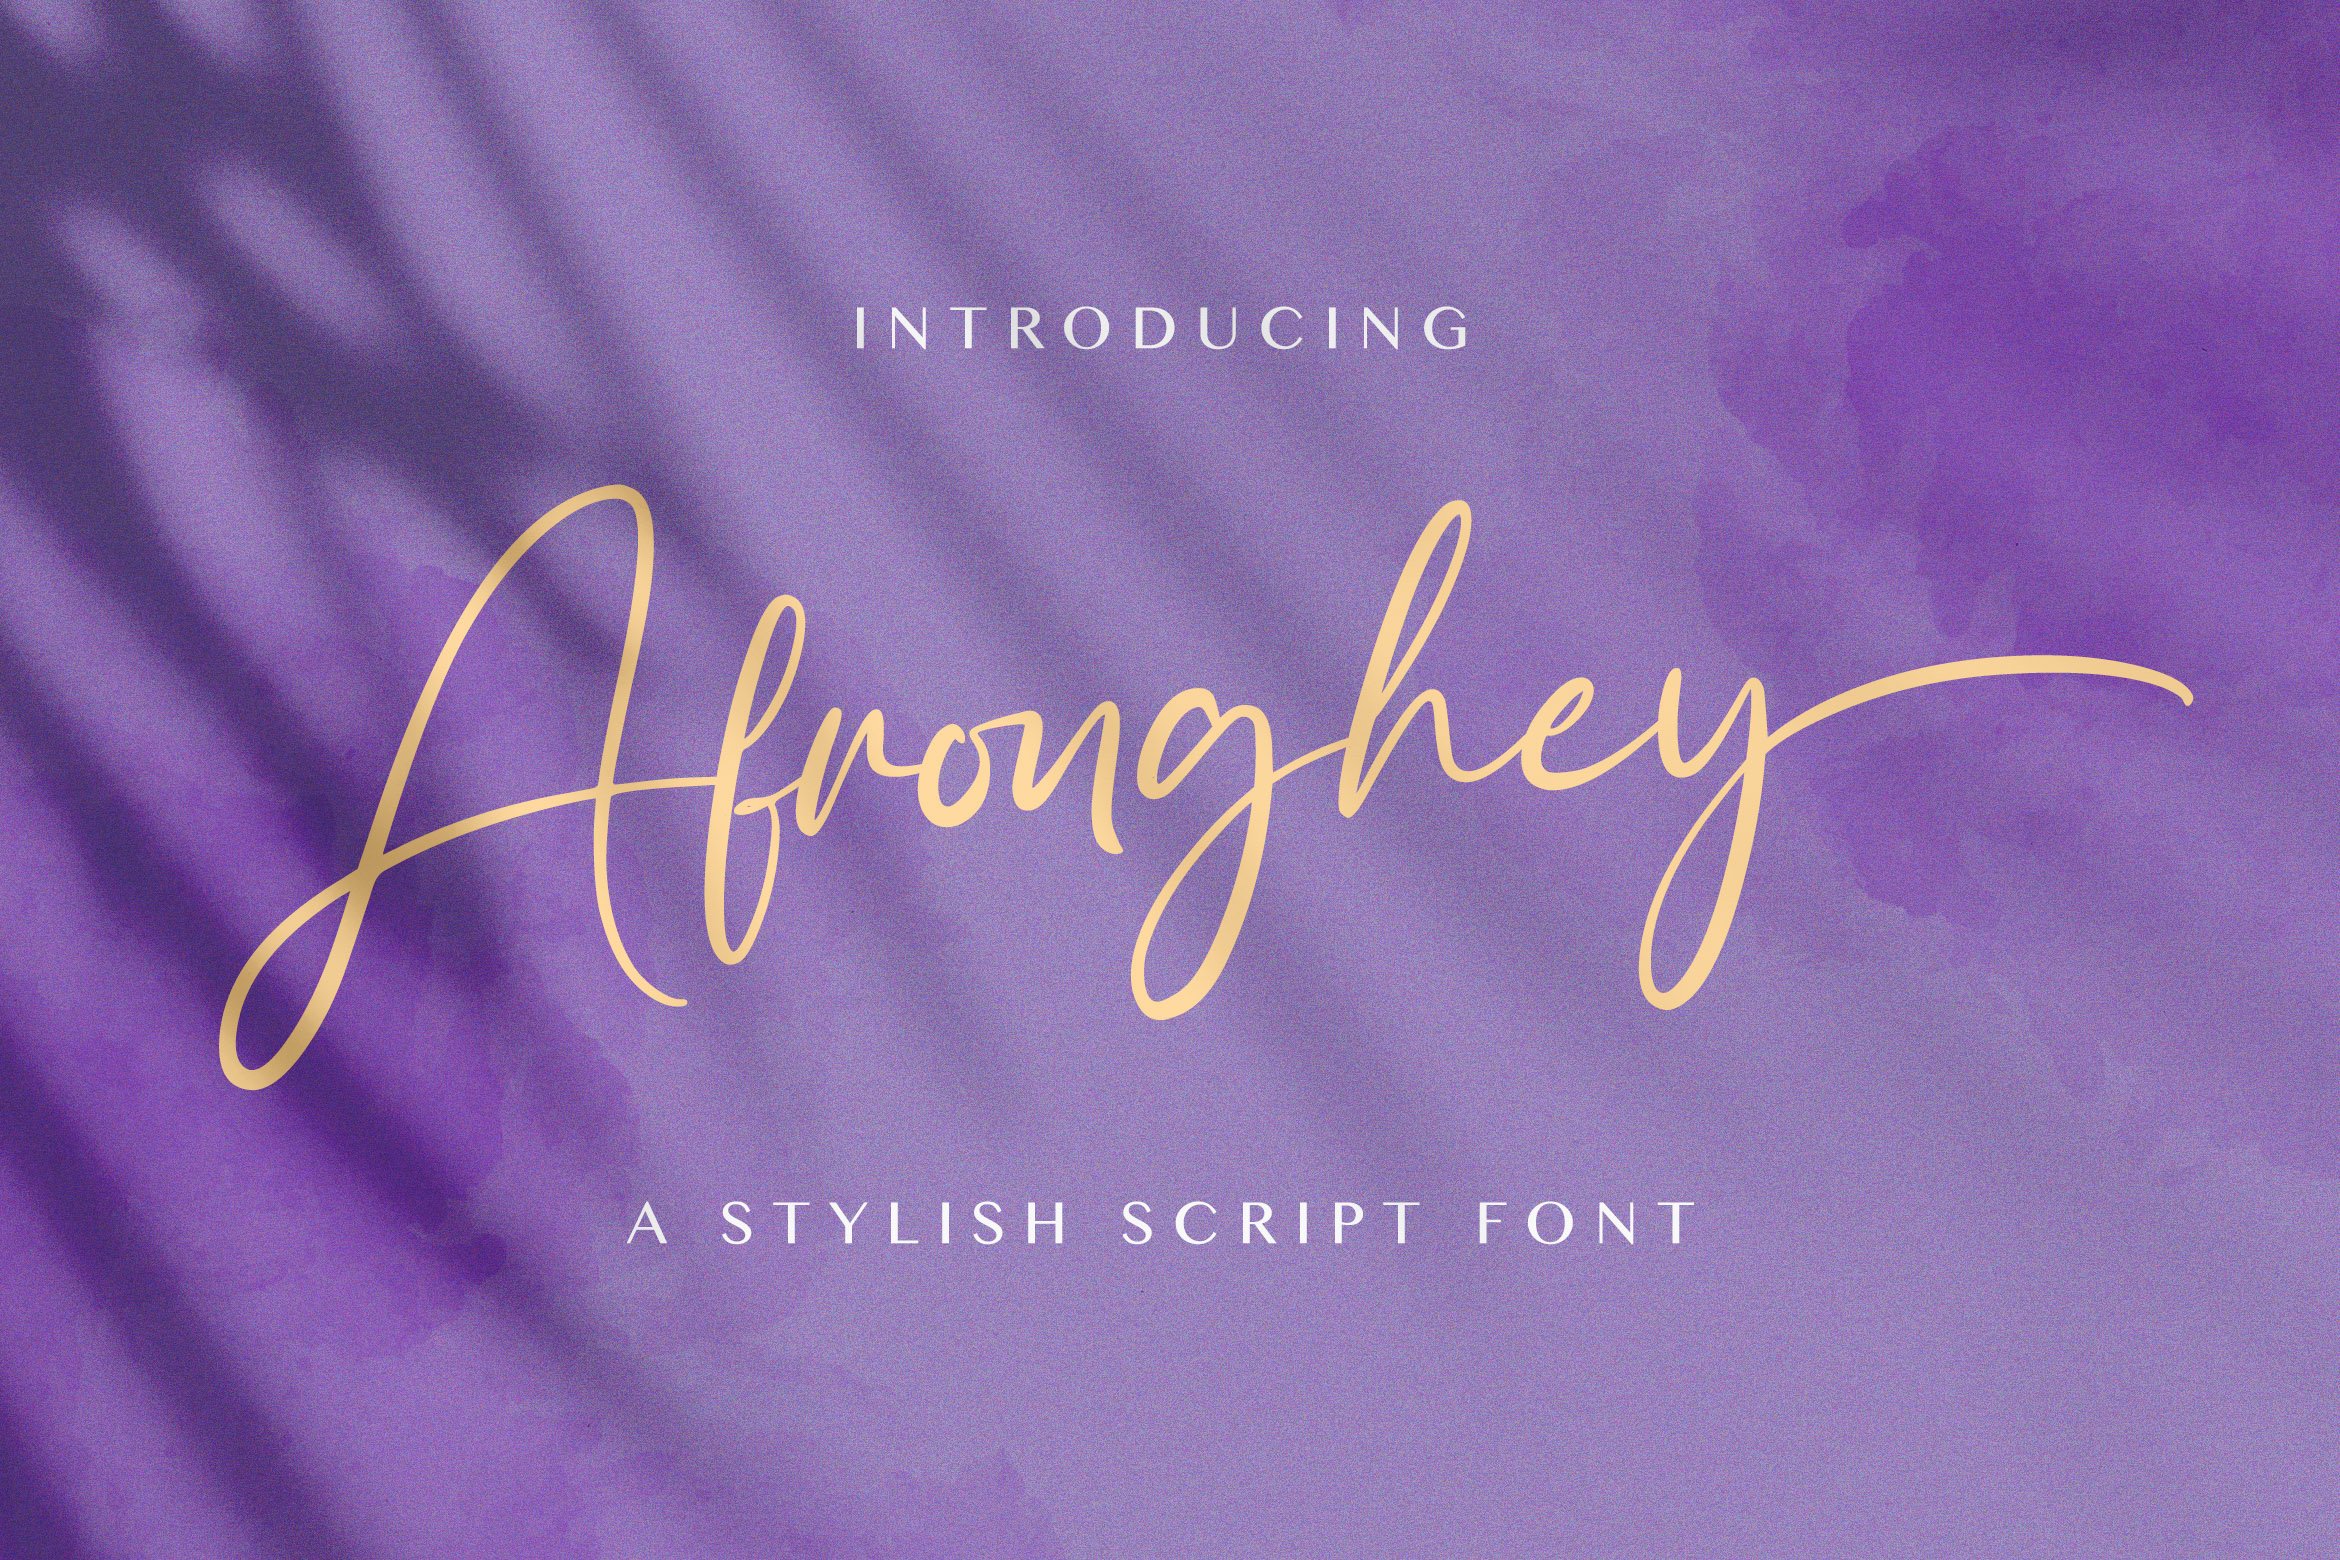 Afronghey - Handwritten Font cover image.